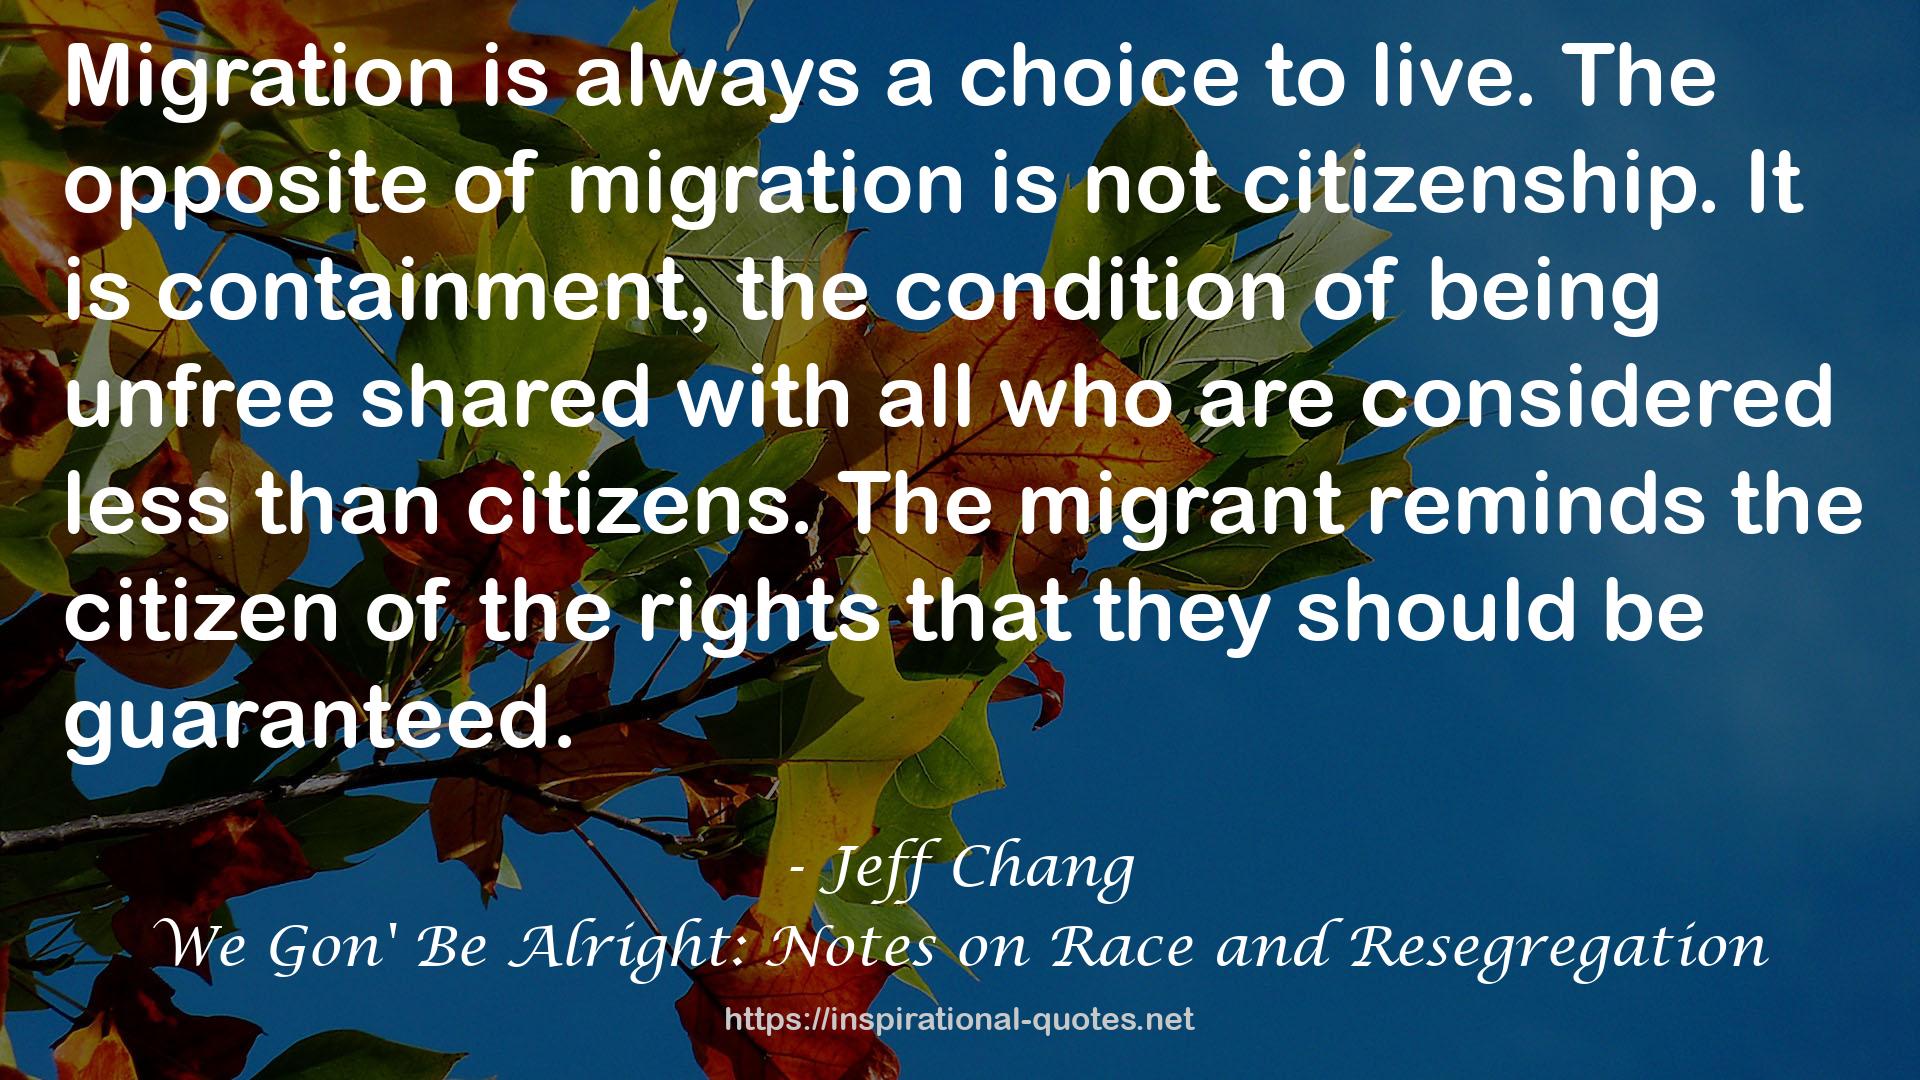 Jeff Chang QUOTES